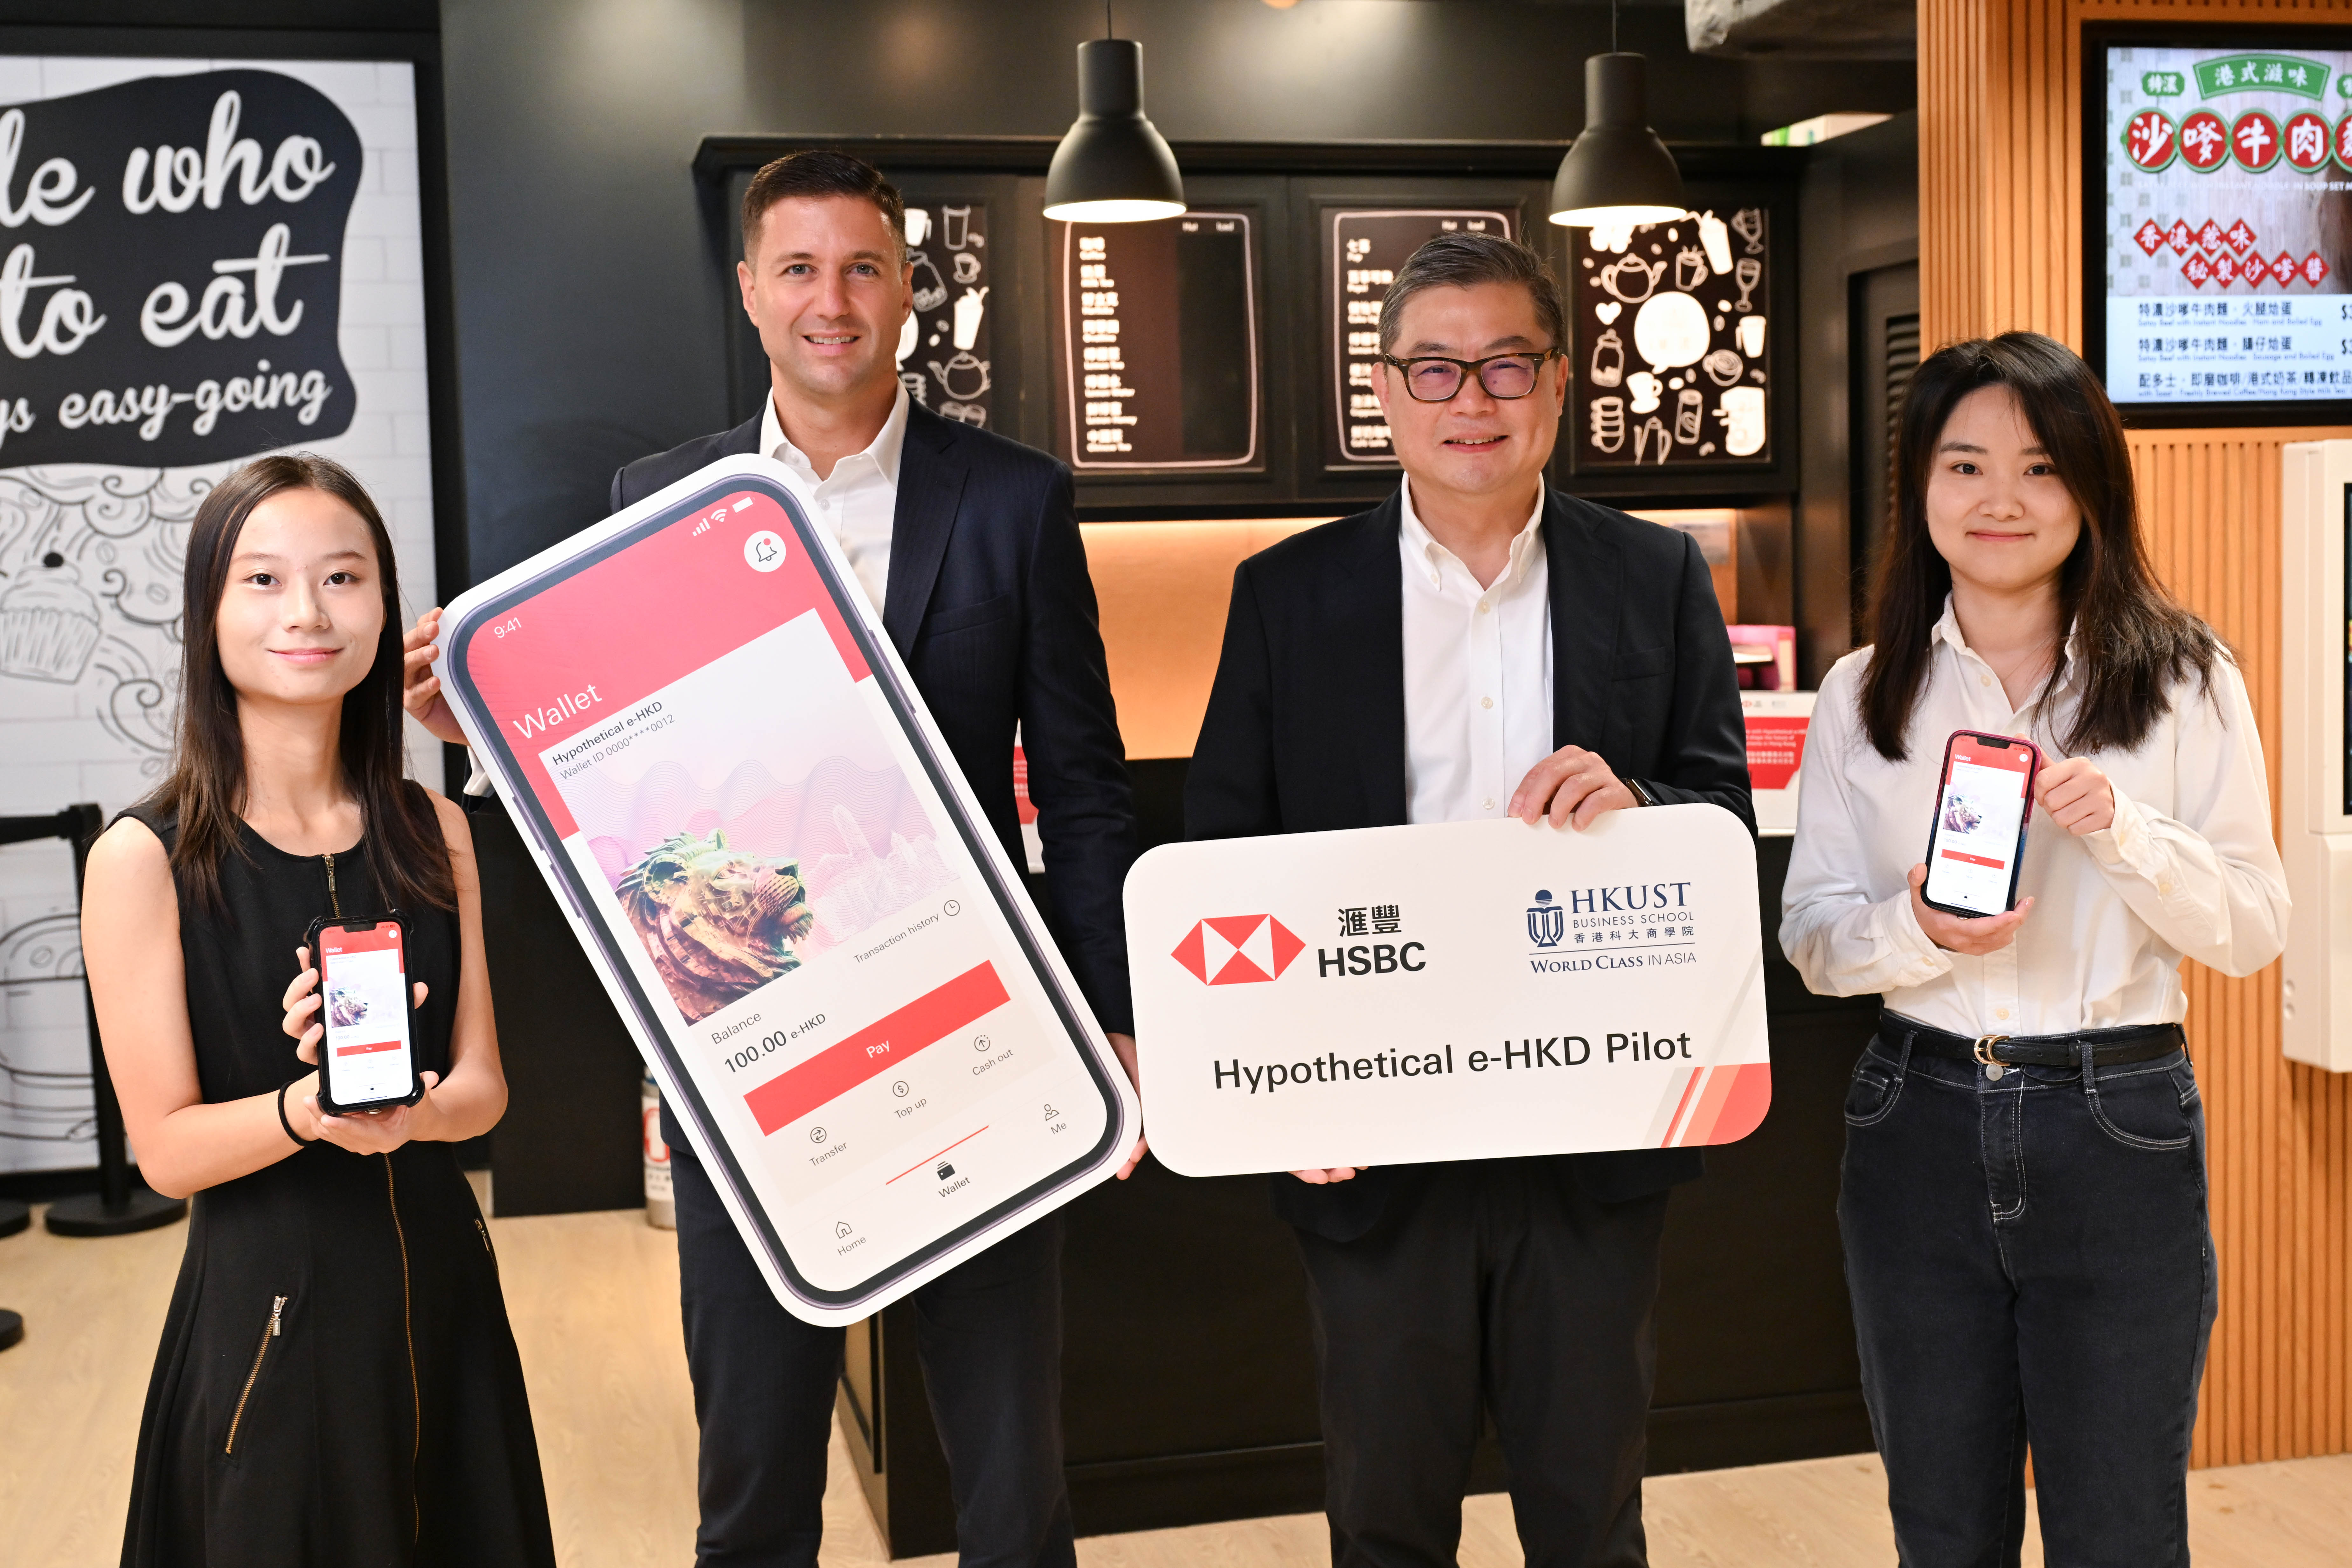 HSBC and HKUST Business School will commence on 16 September a one-week Hypothetical e-HKD pilot at five on-campus merchants in HKUST. Pictured here are Bojan Obradović, Chief Digital Officer Hong Kong, HSBC (second left), Prof. TAM Kar Yan, Dean of HKUST Business School (second right) and participating students.